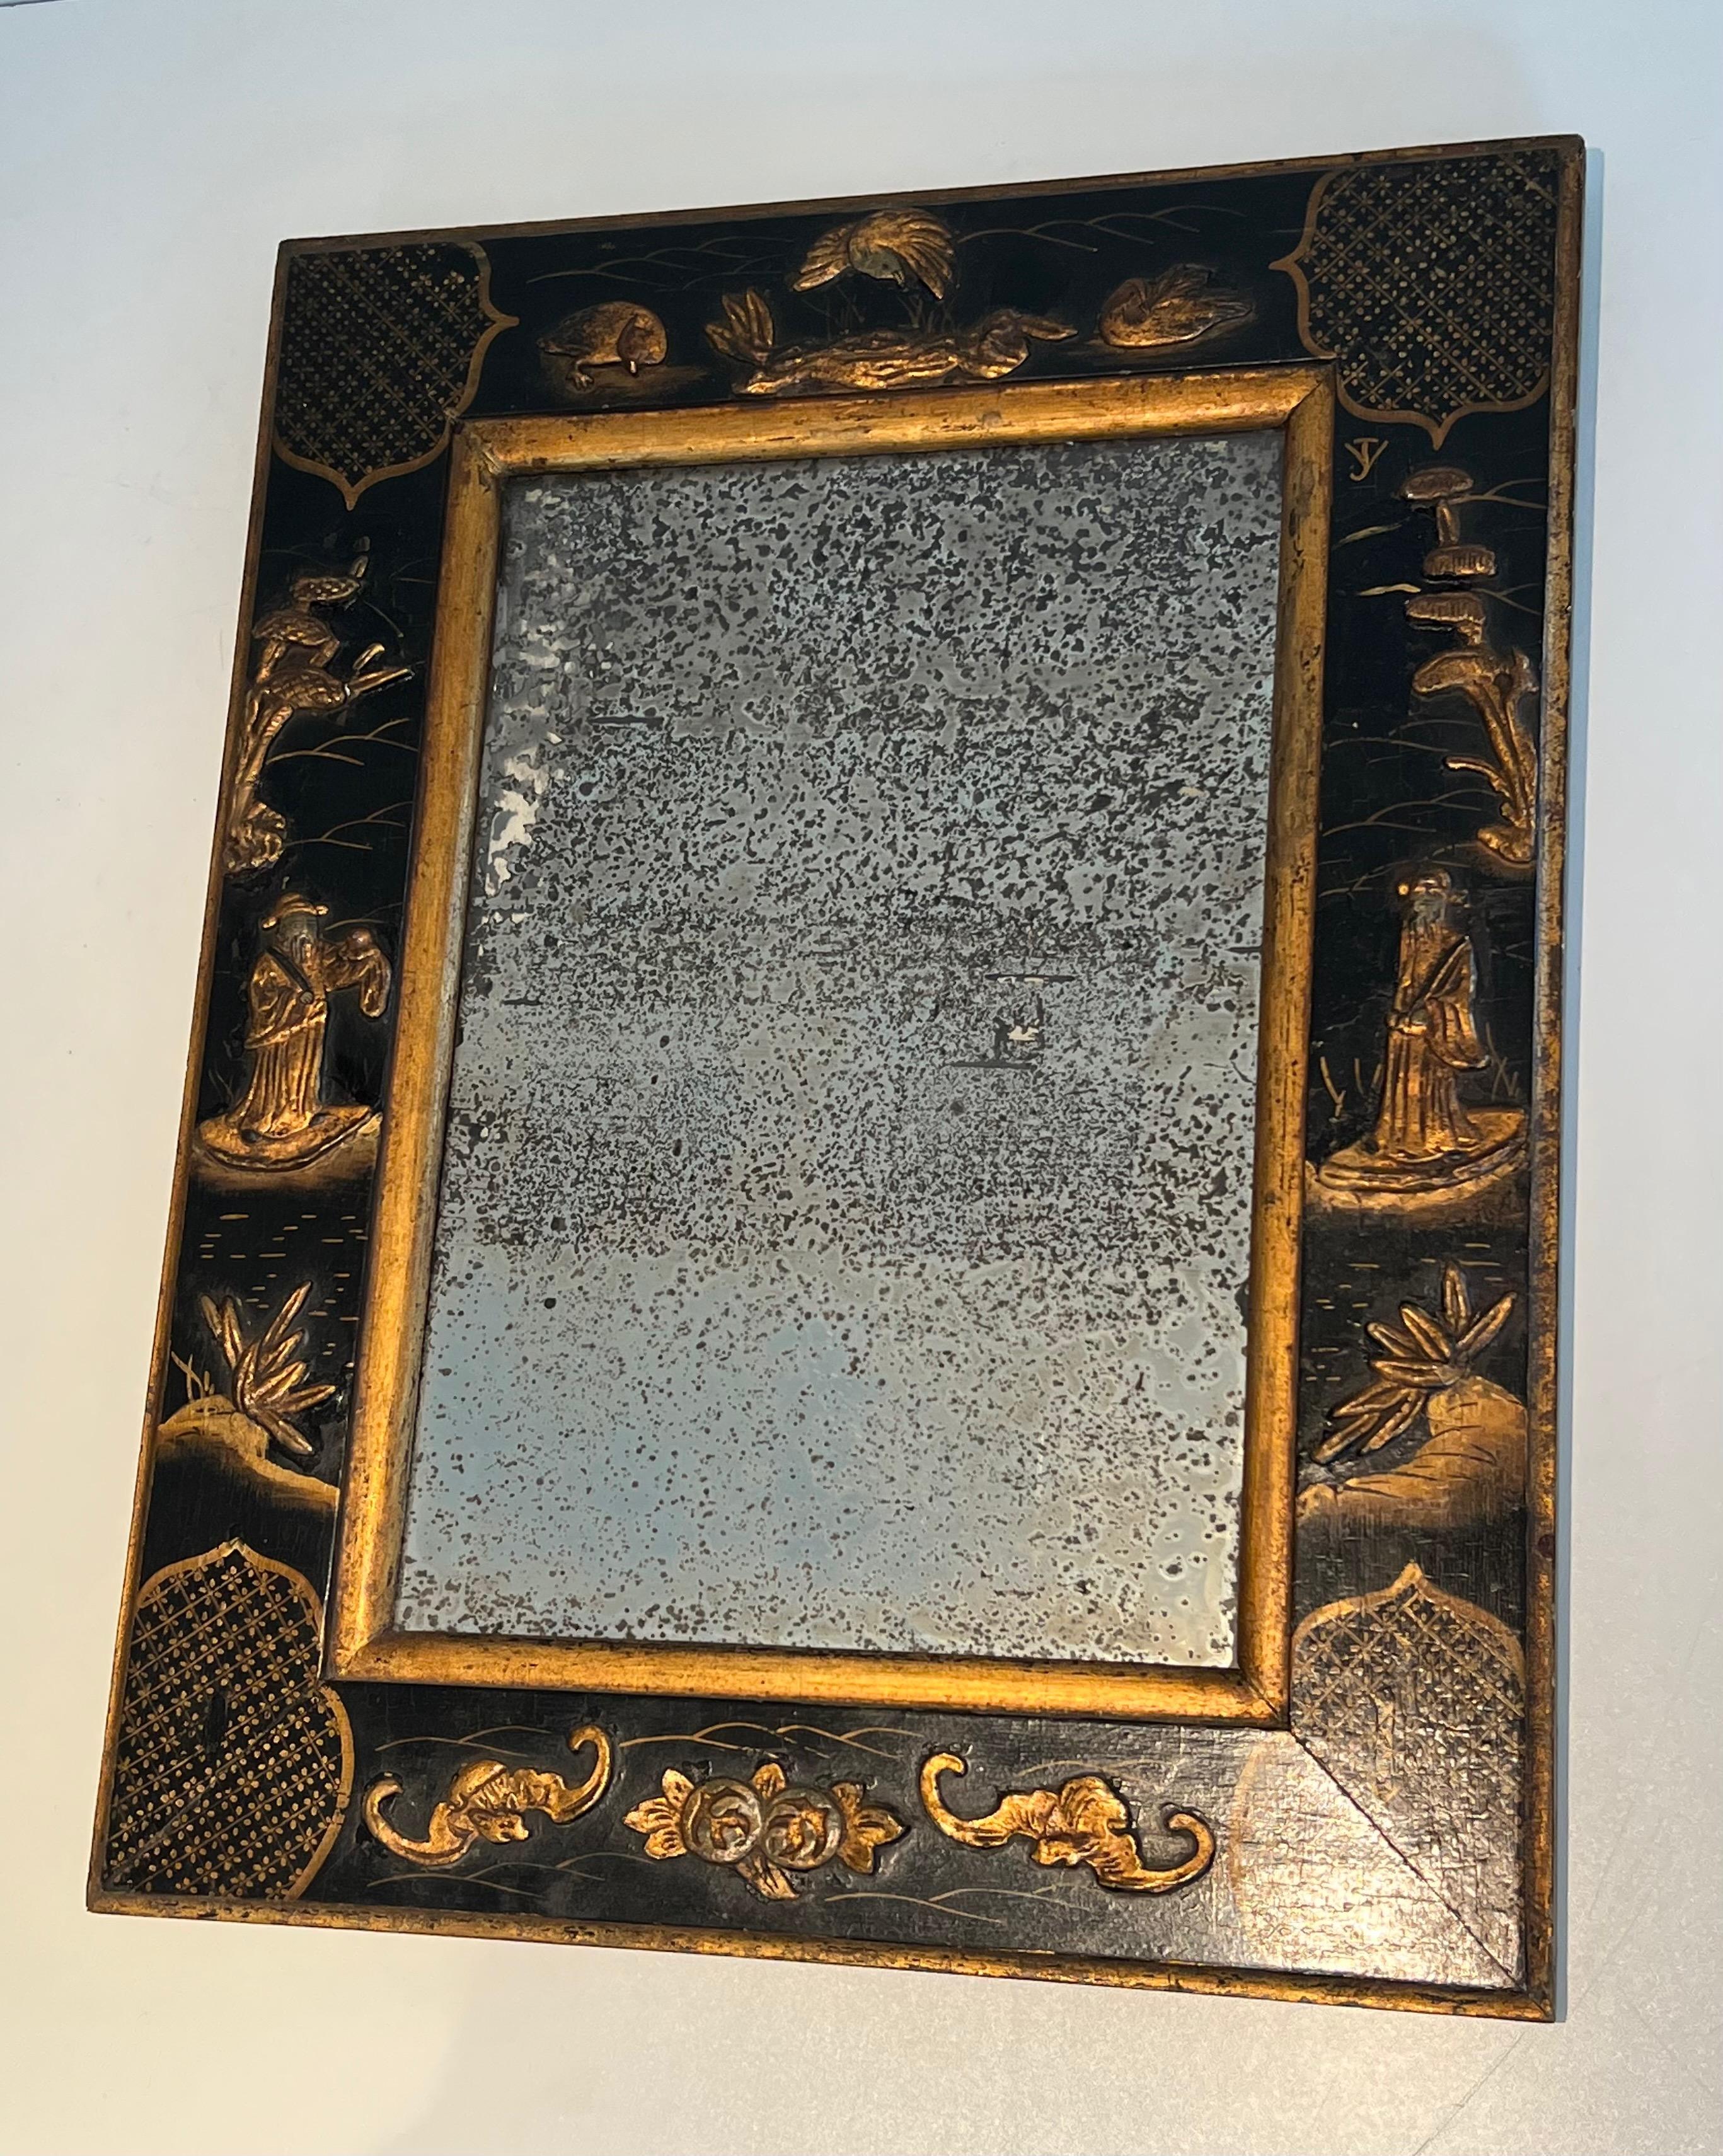 This very nice mirror is made of an old mercury mirror surrounded by a wooden frame beautifully lacquered and gilding with Chinese scenes. This is a French work in the style of Maison Jansen. Circa 1940